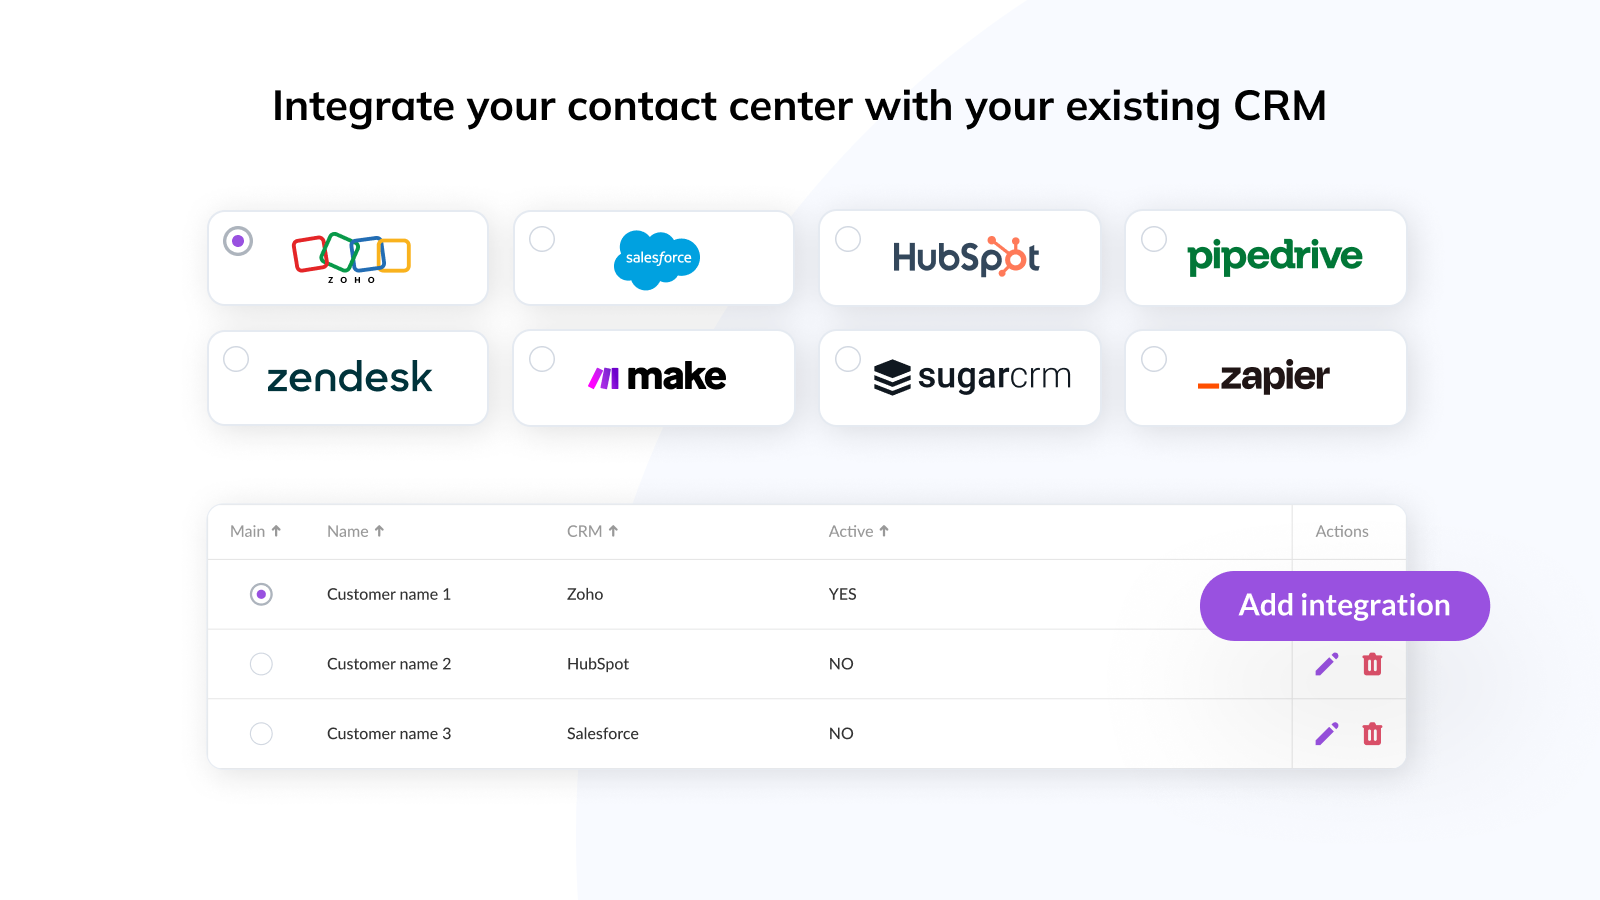 Integrate your contact center with your existing CRM